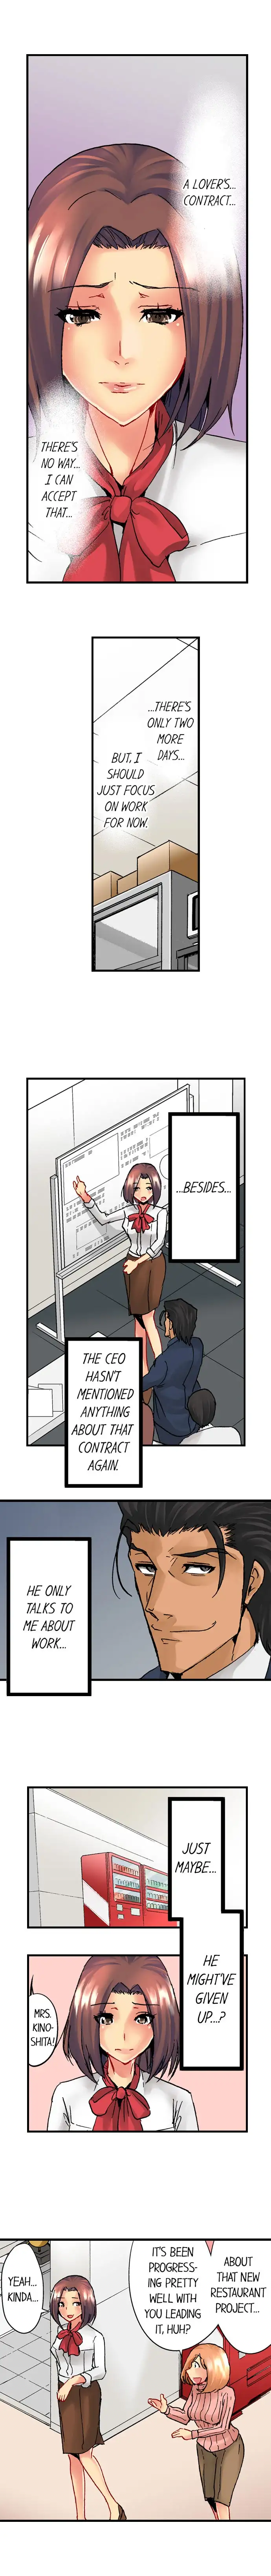 The NTR Method - Chapter 5 Page 4